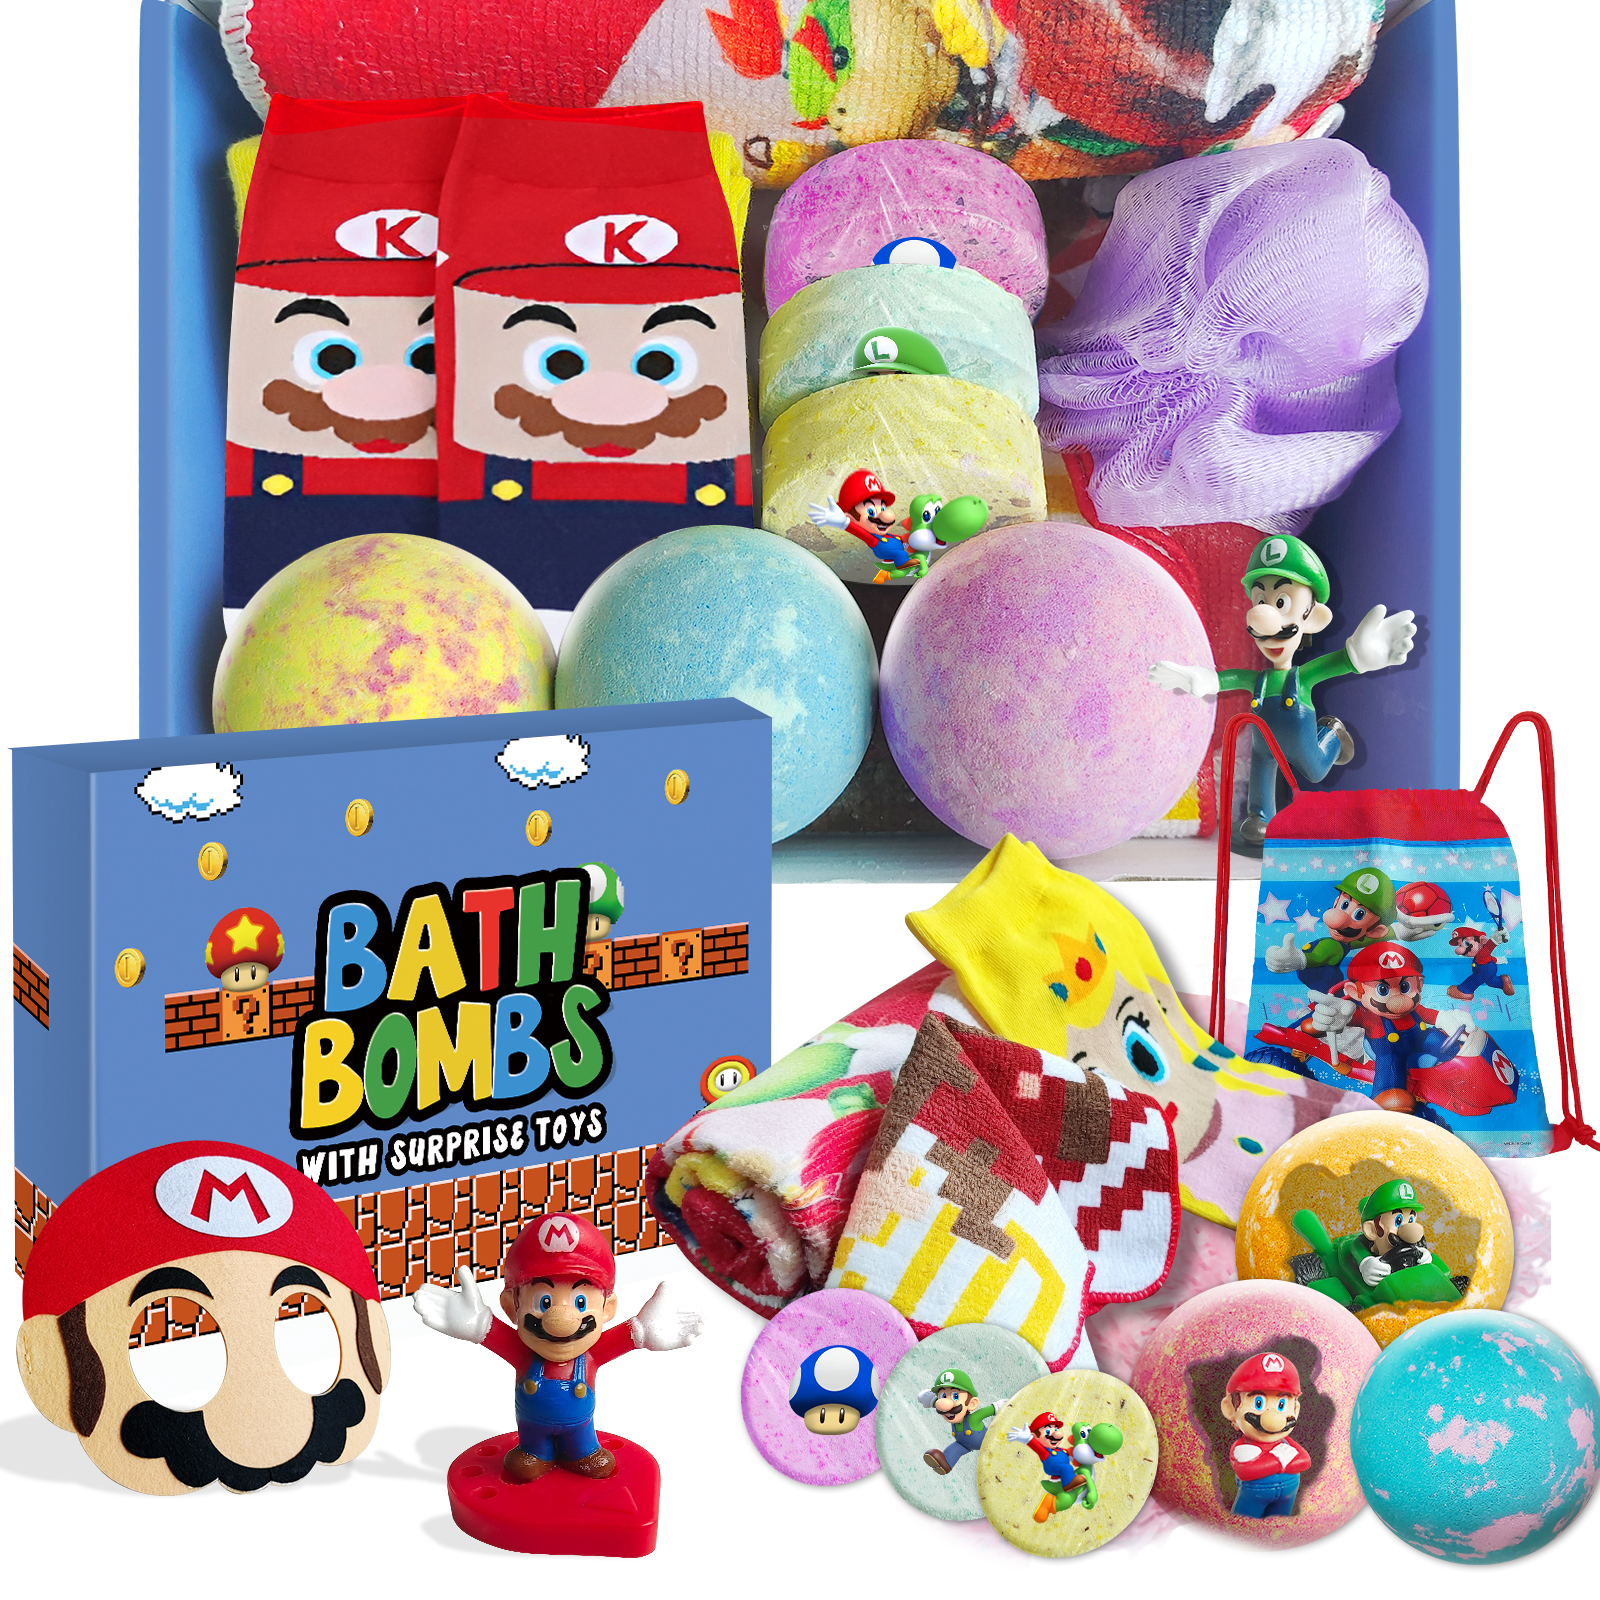 Mario Birthday Gifts Set: Bath Bombs with Mario Toys Inside, Shower Steamers, Cosplay Mask, Drawstring Backpack, Socks, Towel and Blanket, 13 Pcs Mario Toys Set for Kids Boys Girls Age 3 4 5 6 7 8 9About this item 【Mario Theme Birthday Gift Set】This Class